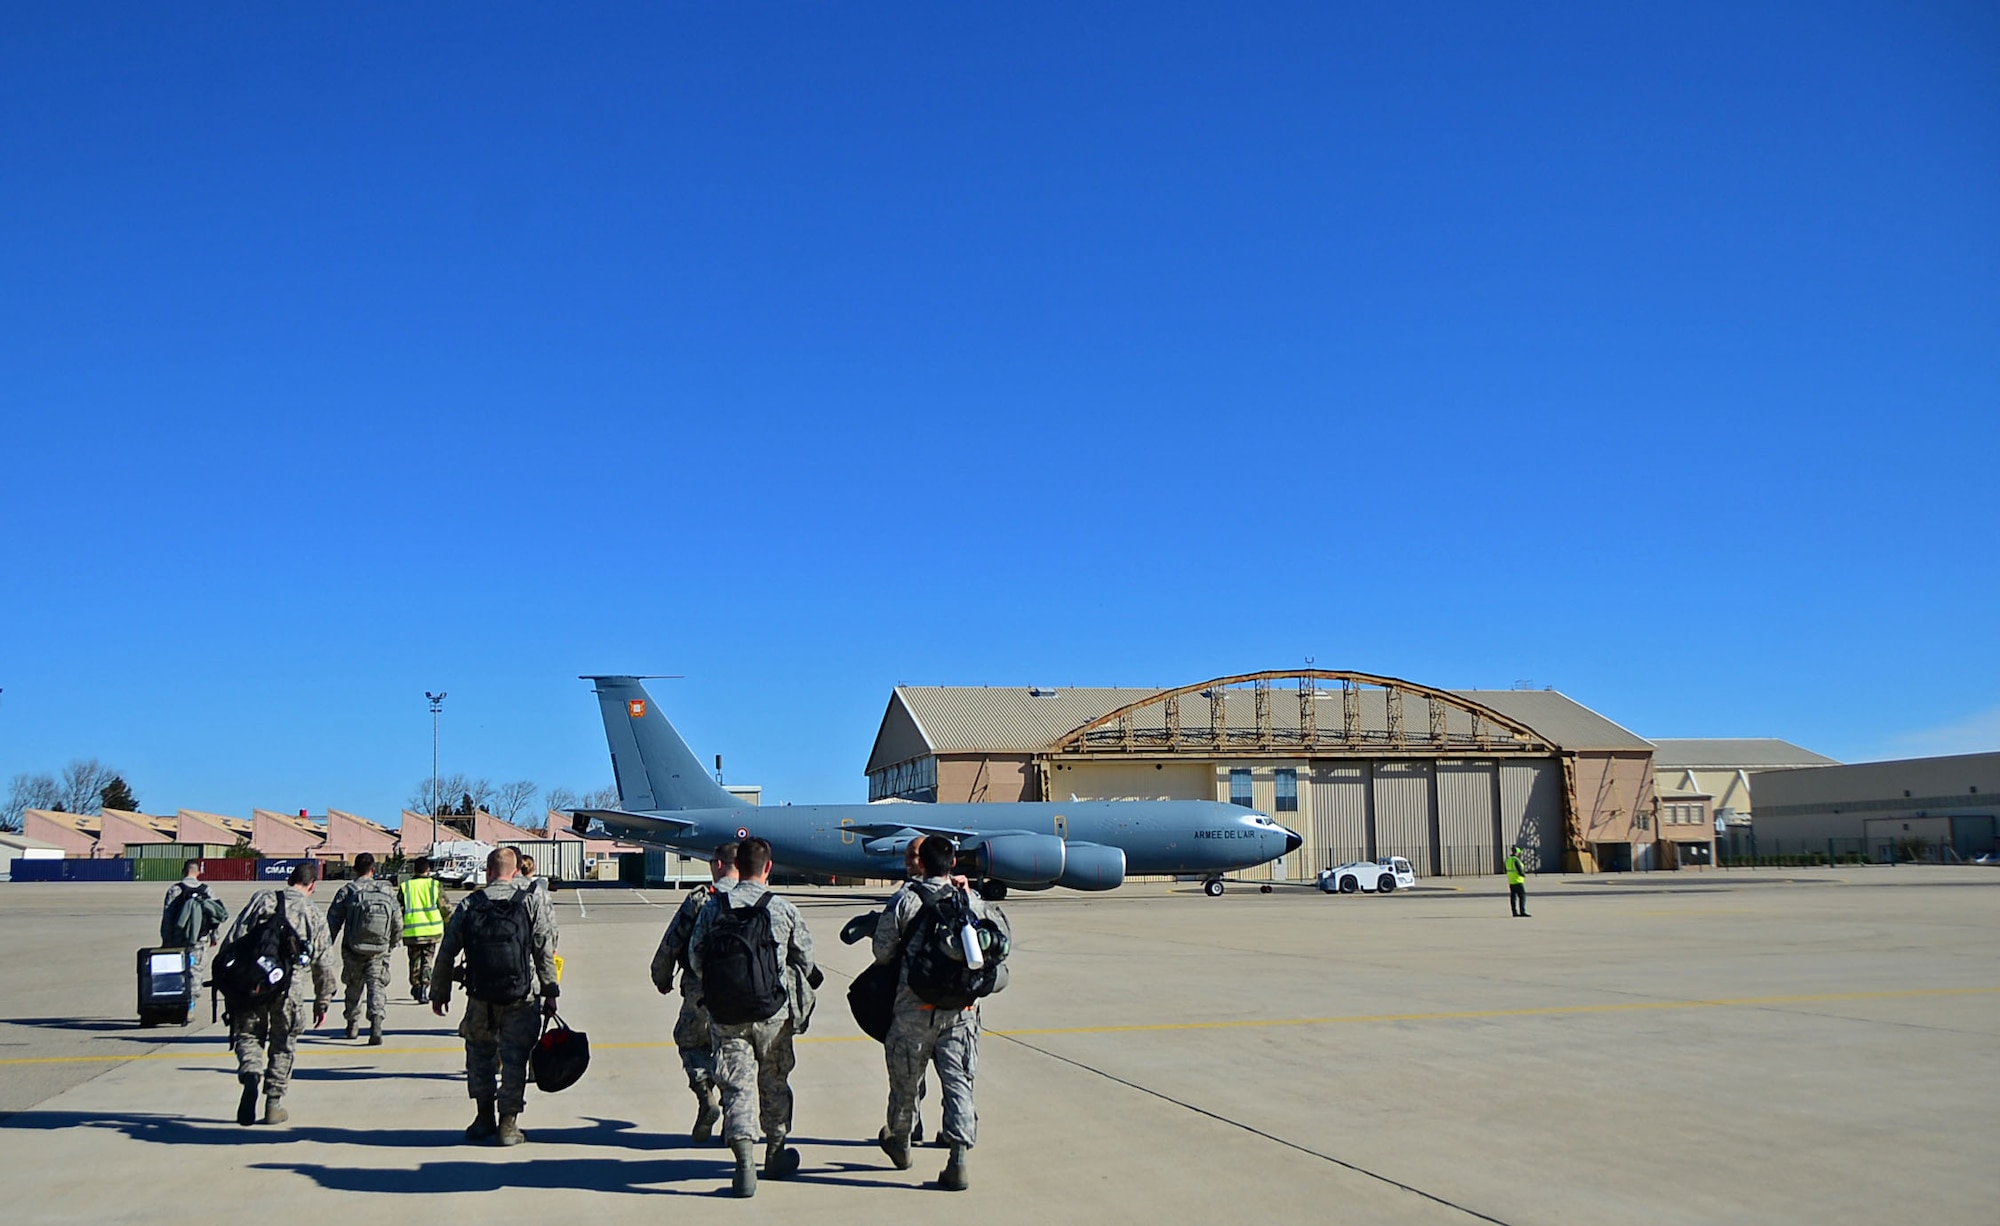 U.S. Air Force service members arrive at Istres-Le Tubé Air Base, France, in support of Operation Juniper Micron, Feb. 21, 2016. Since 2013, the U.S has been supporting the French government in OJM by providing air refueling and airlift support of French operations in Mali and North Africa. (U.S. Air Force photo by Senior Airman Erin Trower/Released)